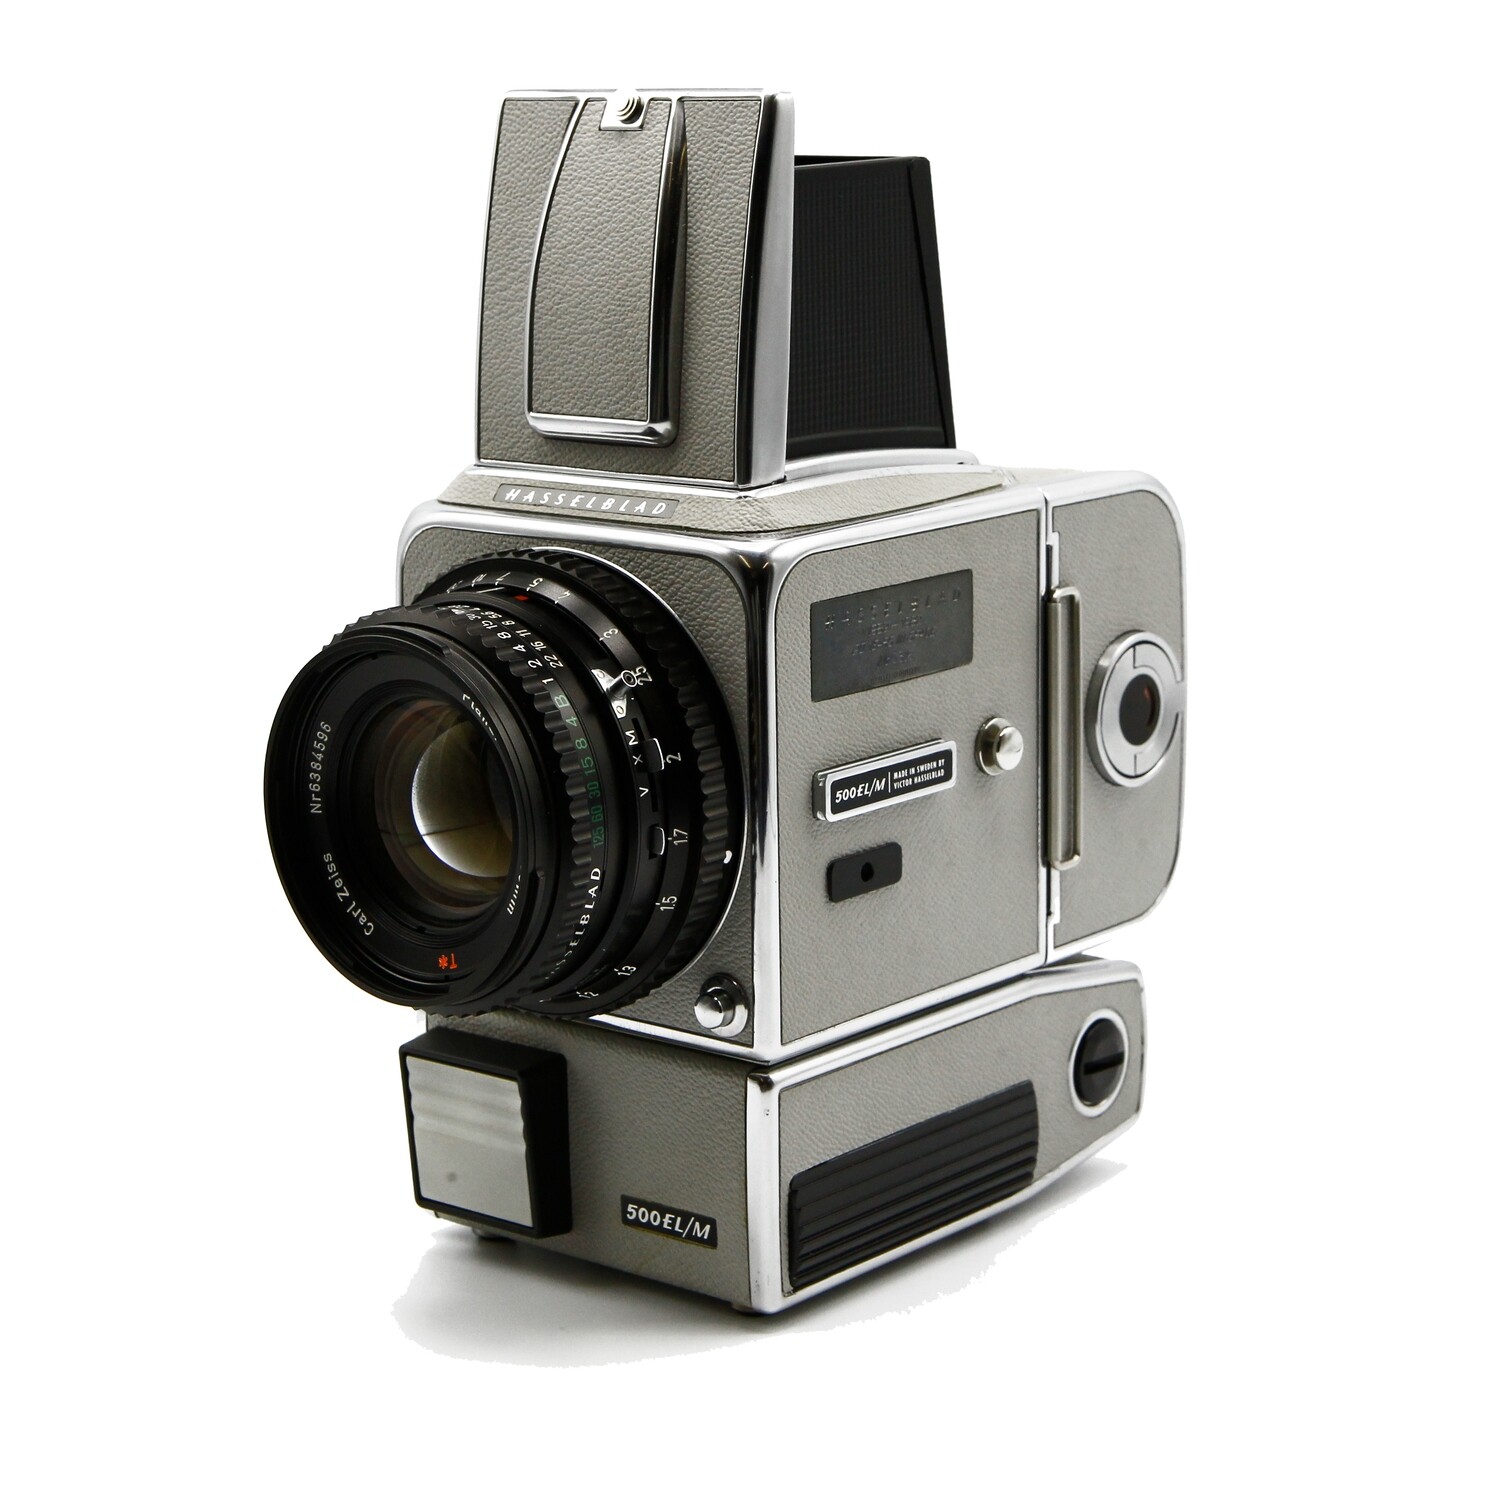 HASSELBLAD 500EL/M White, 20 years in Space, Planar 80mm/F2,8 C T*, NEW